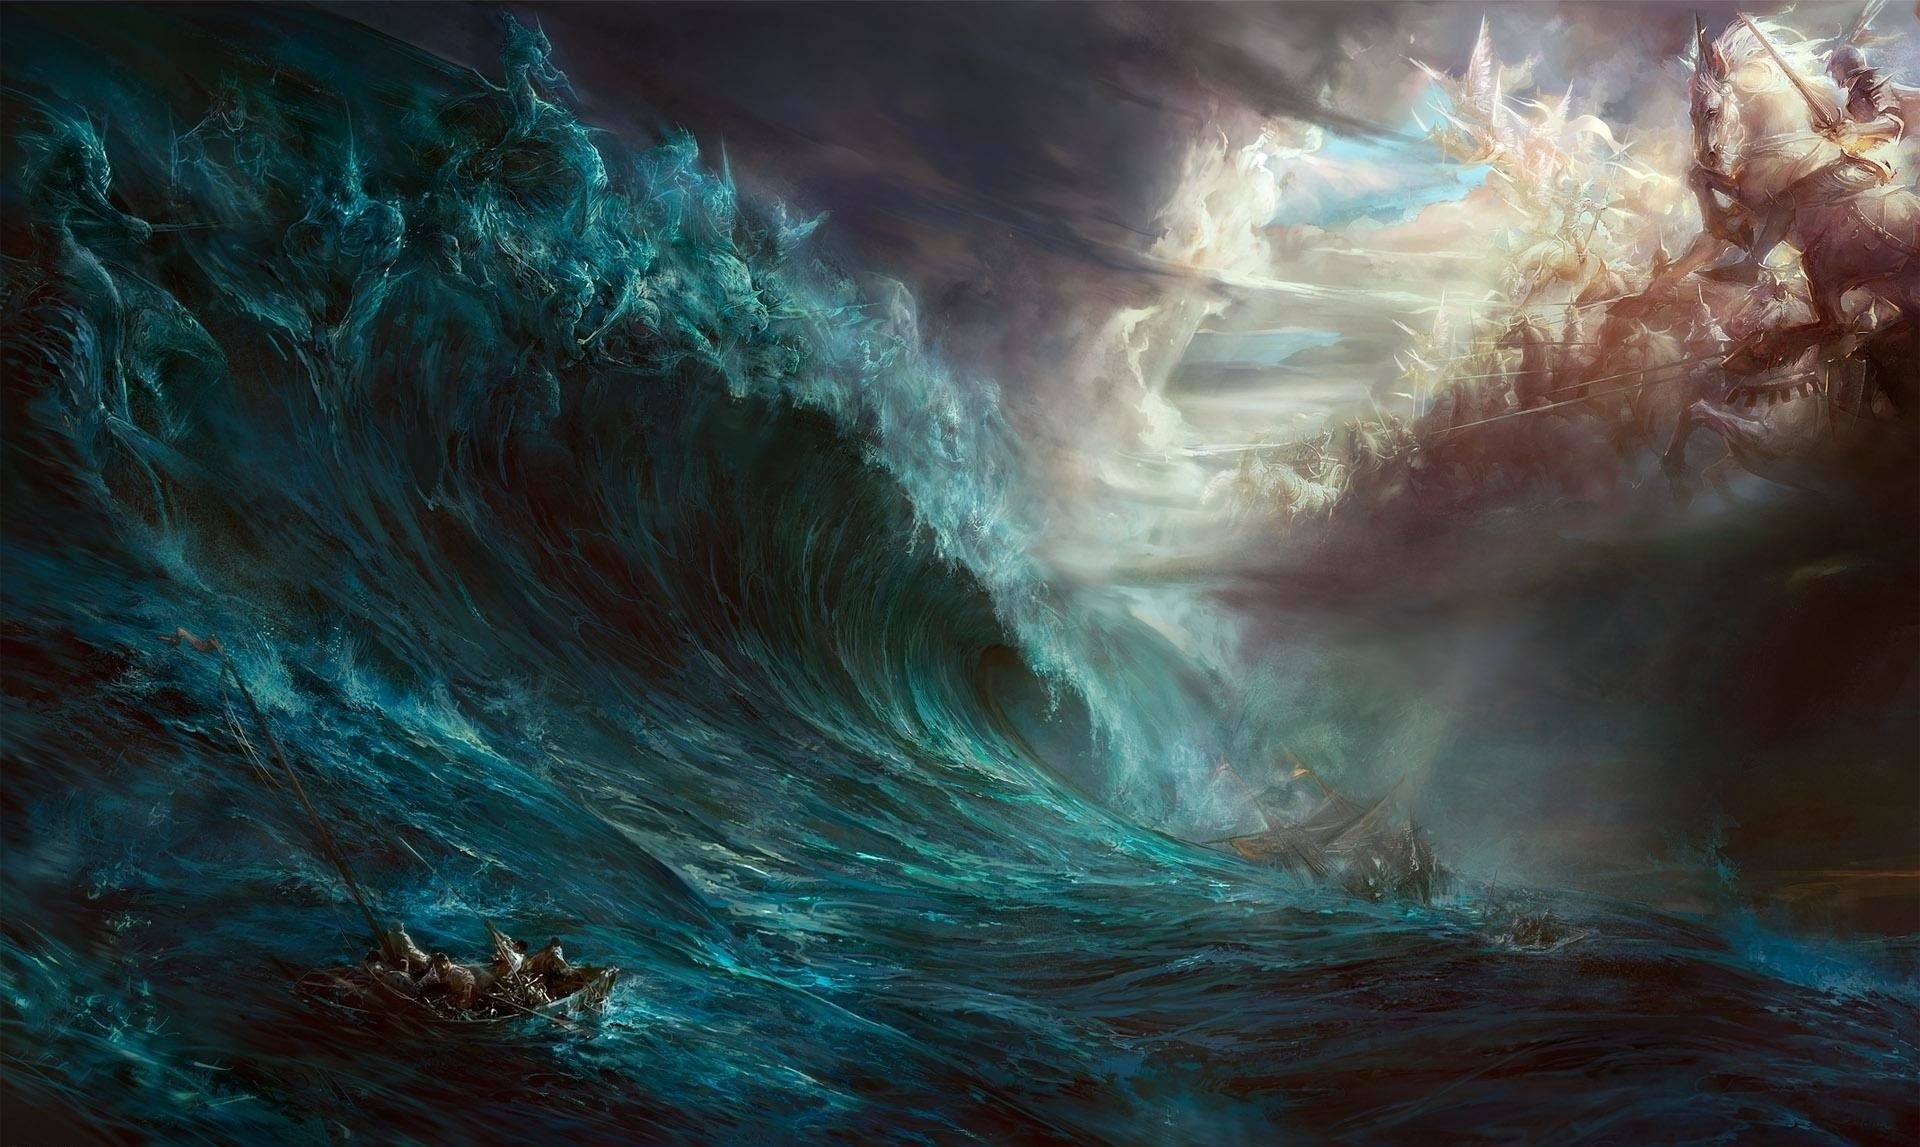 A painting of people on boats in the ocean - Greek mythology